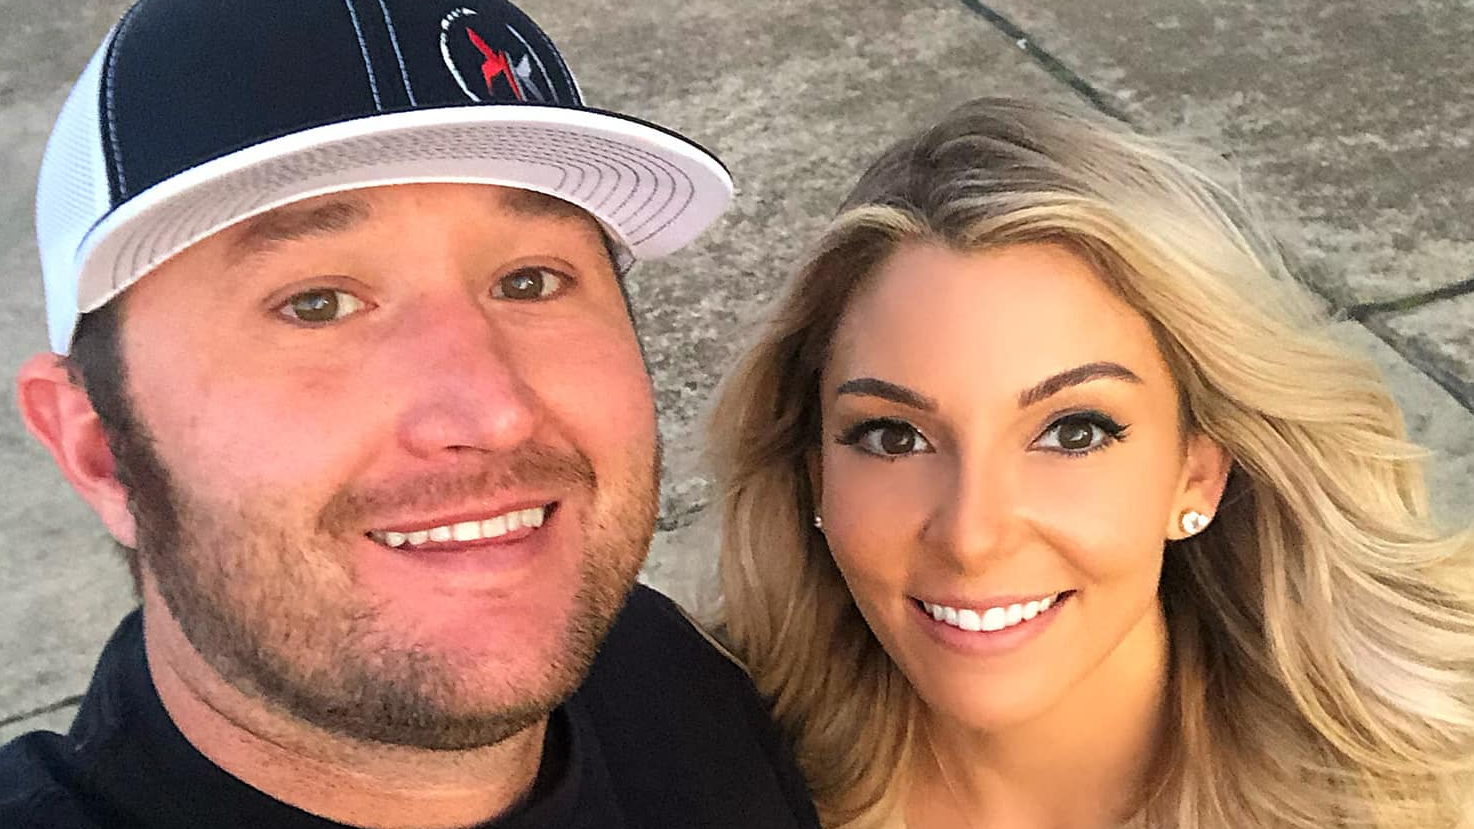 Street Outlaws No Prep Kings stars Lizzy Musi and Kye Kelley during happier times in their relationship